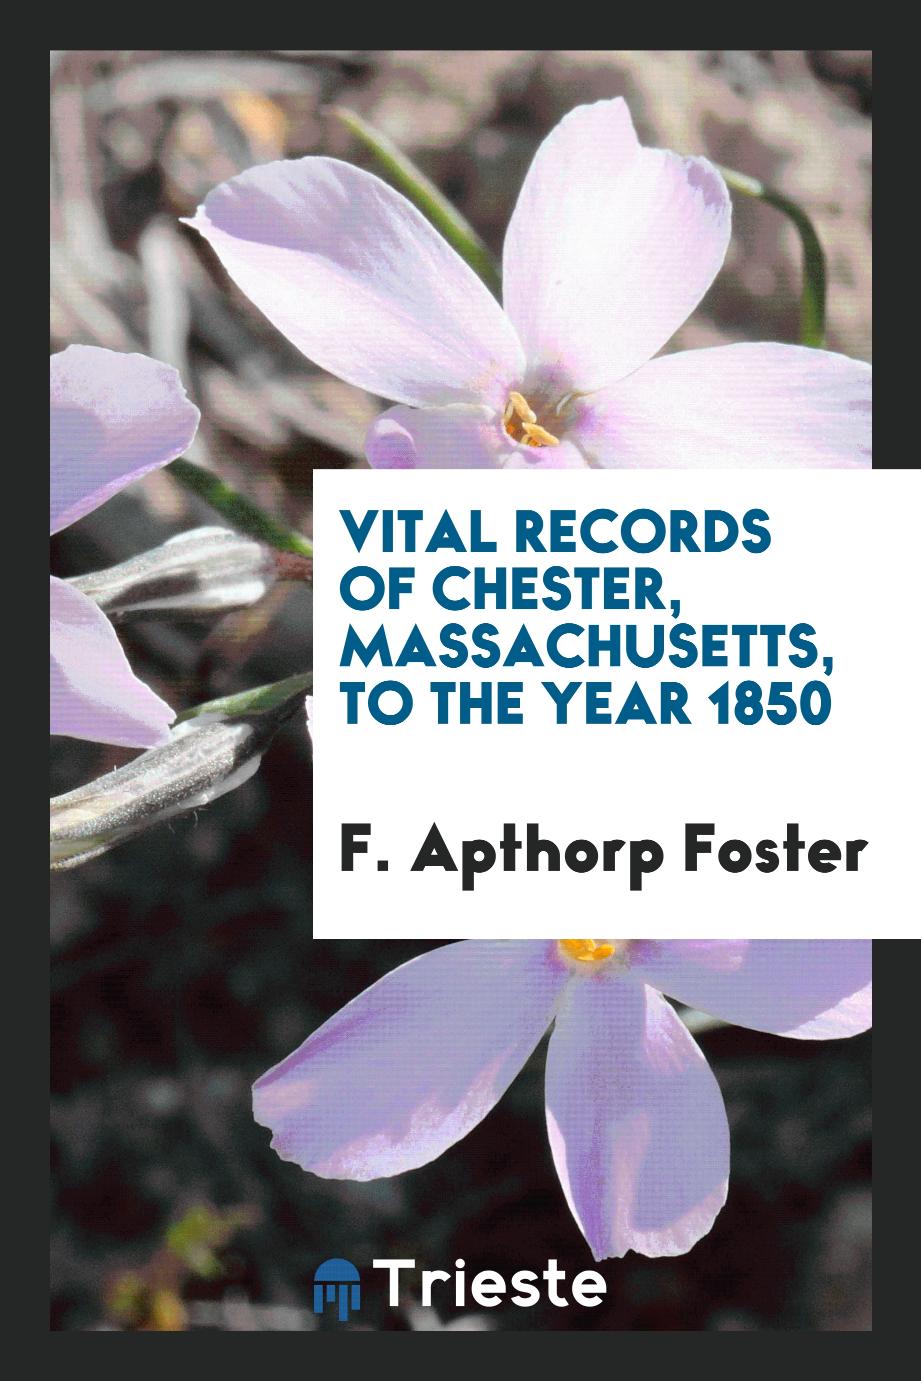 Vital records of Chester, Massachusetts, to the year 1850